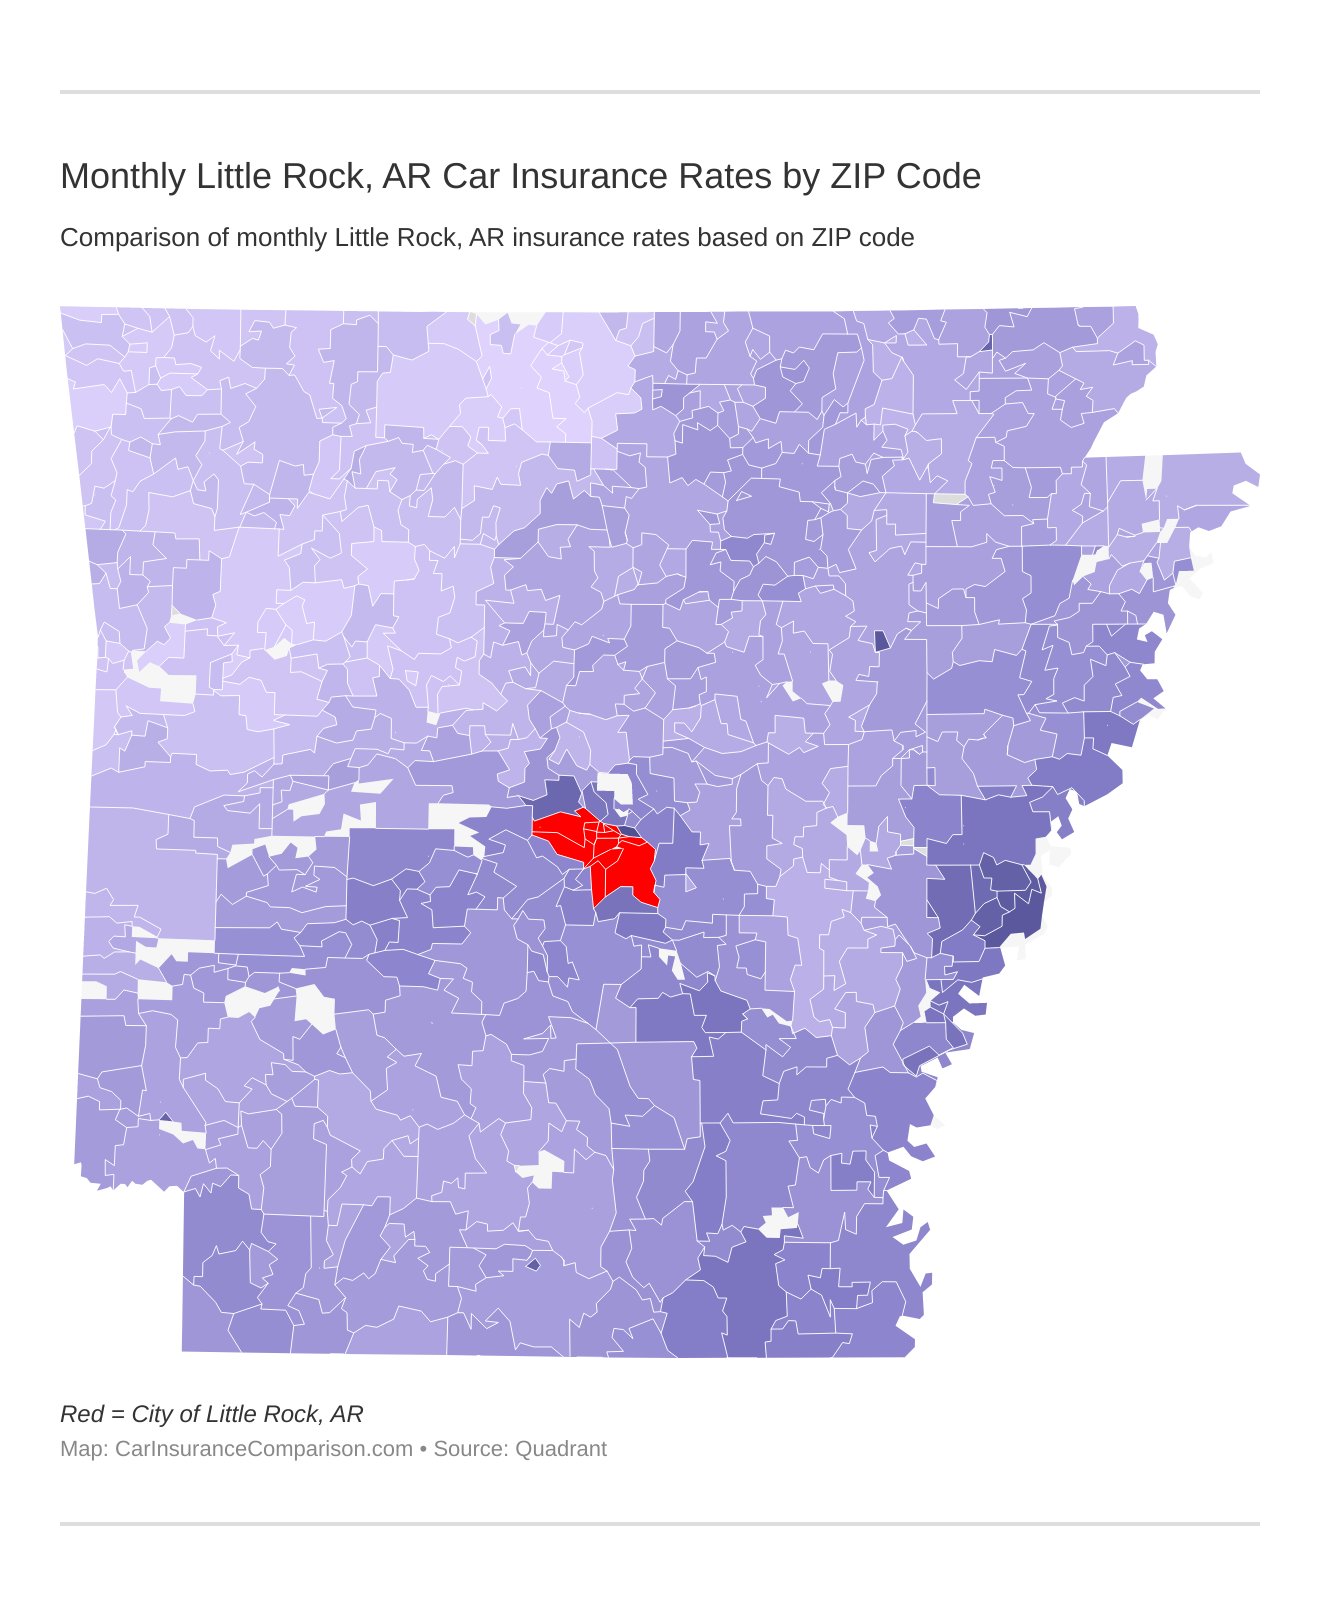 Monthly Little Rock, AR Car Insurance Rates by ZIP Code